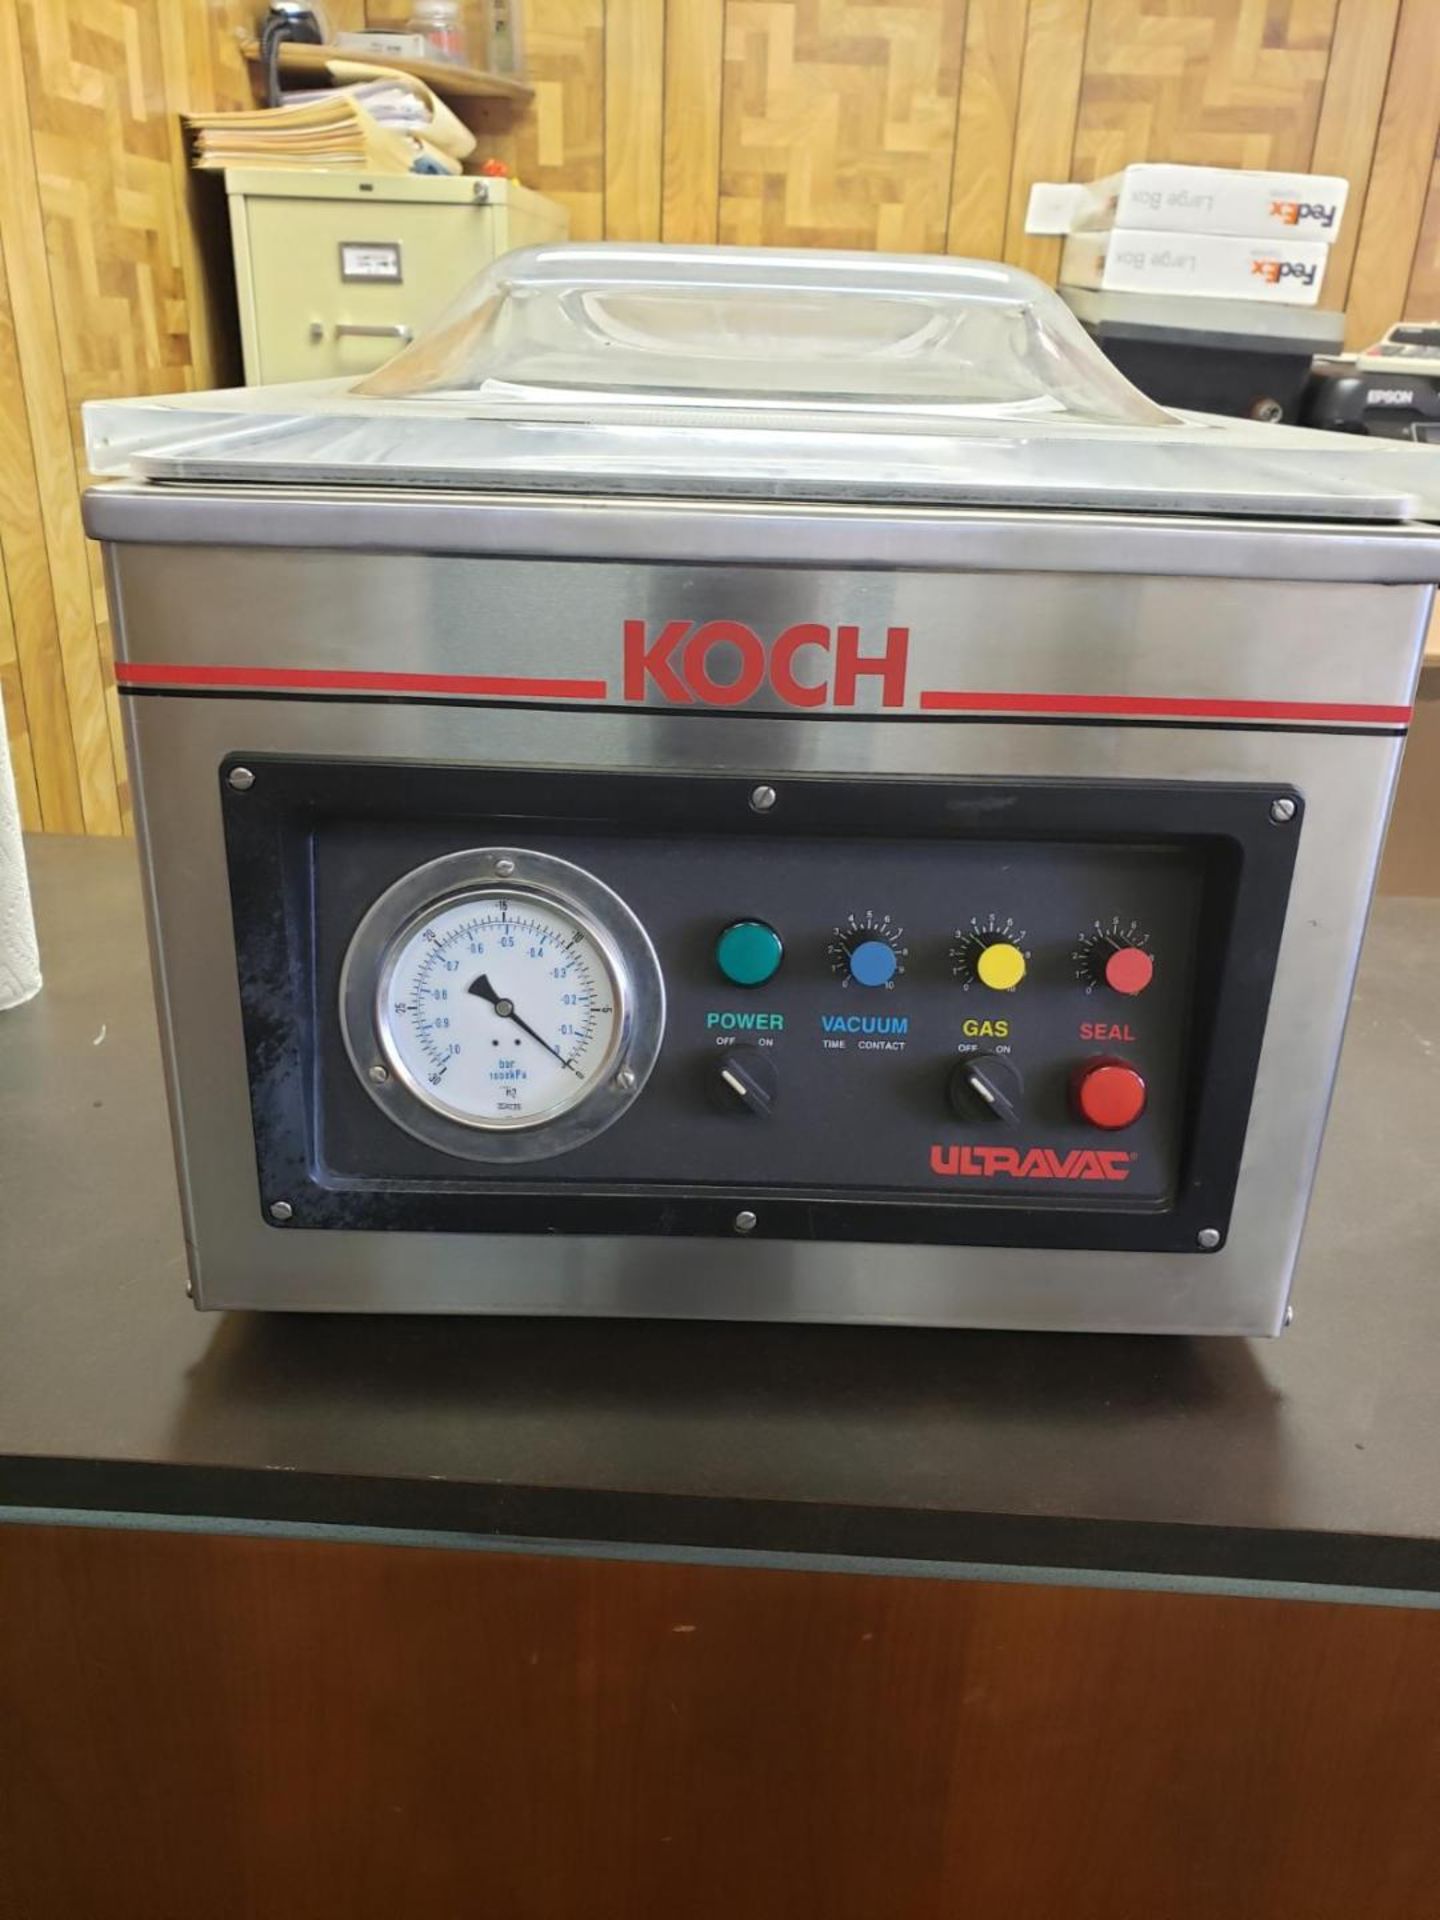 Koch ULTRAVAC Vacuum Sealer, M/N UV 250, S/N 1565, 120 Volts, Series C, with (3) Mold Sets, with S/S - Image 2 of 6